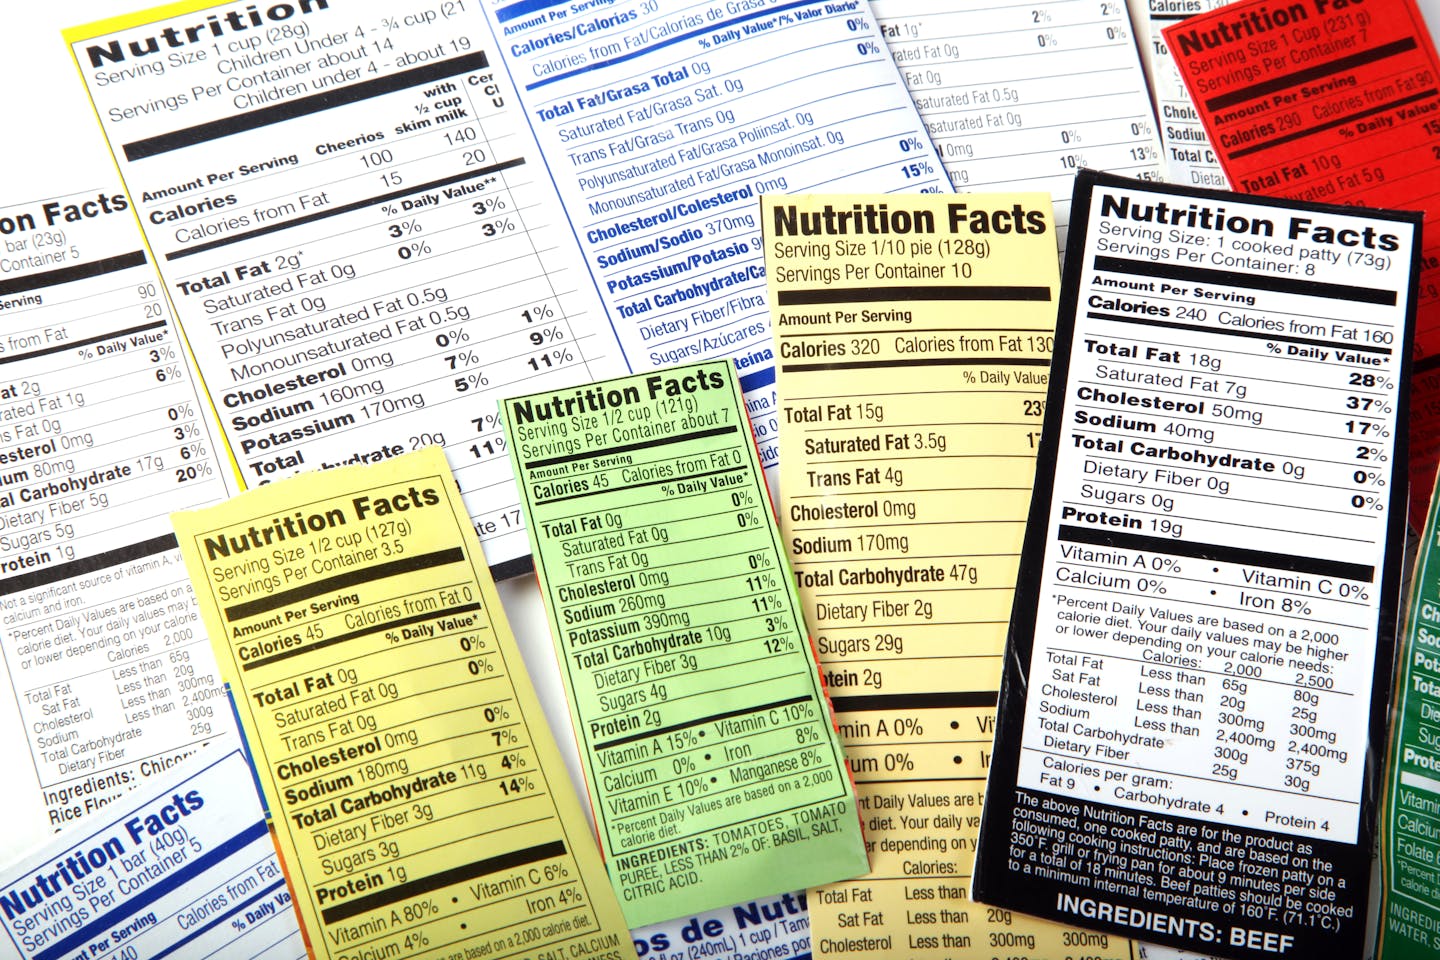 Nutrition Facts panels from multiple food packages